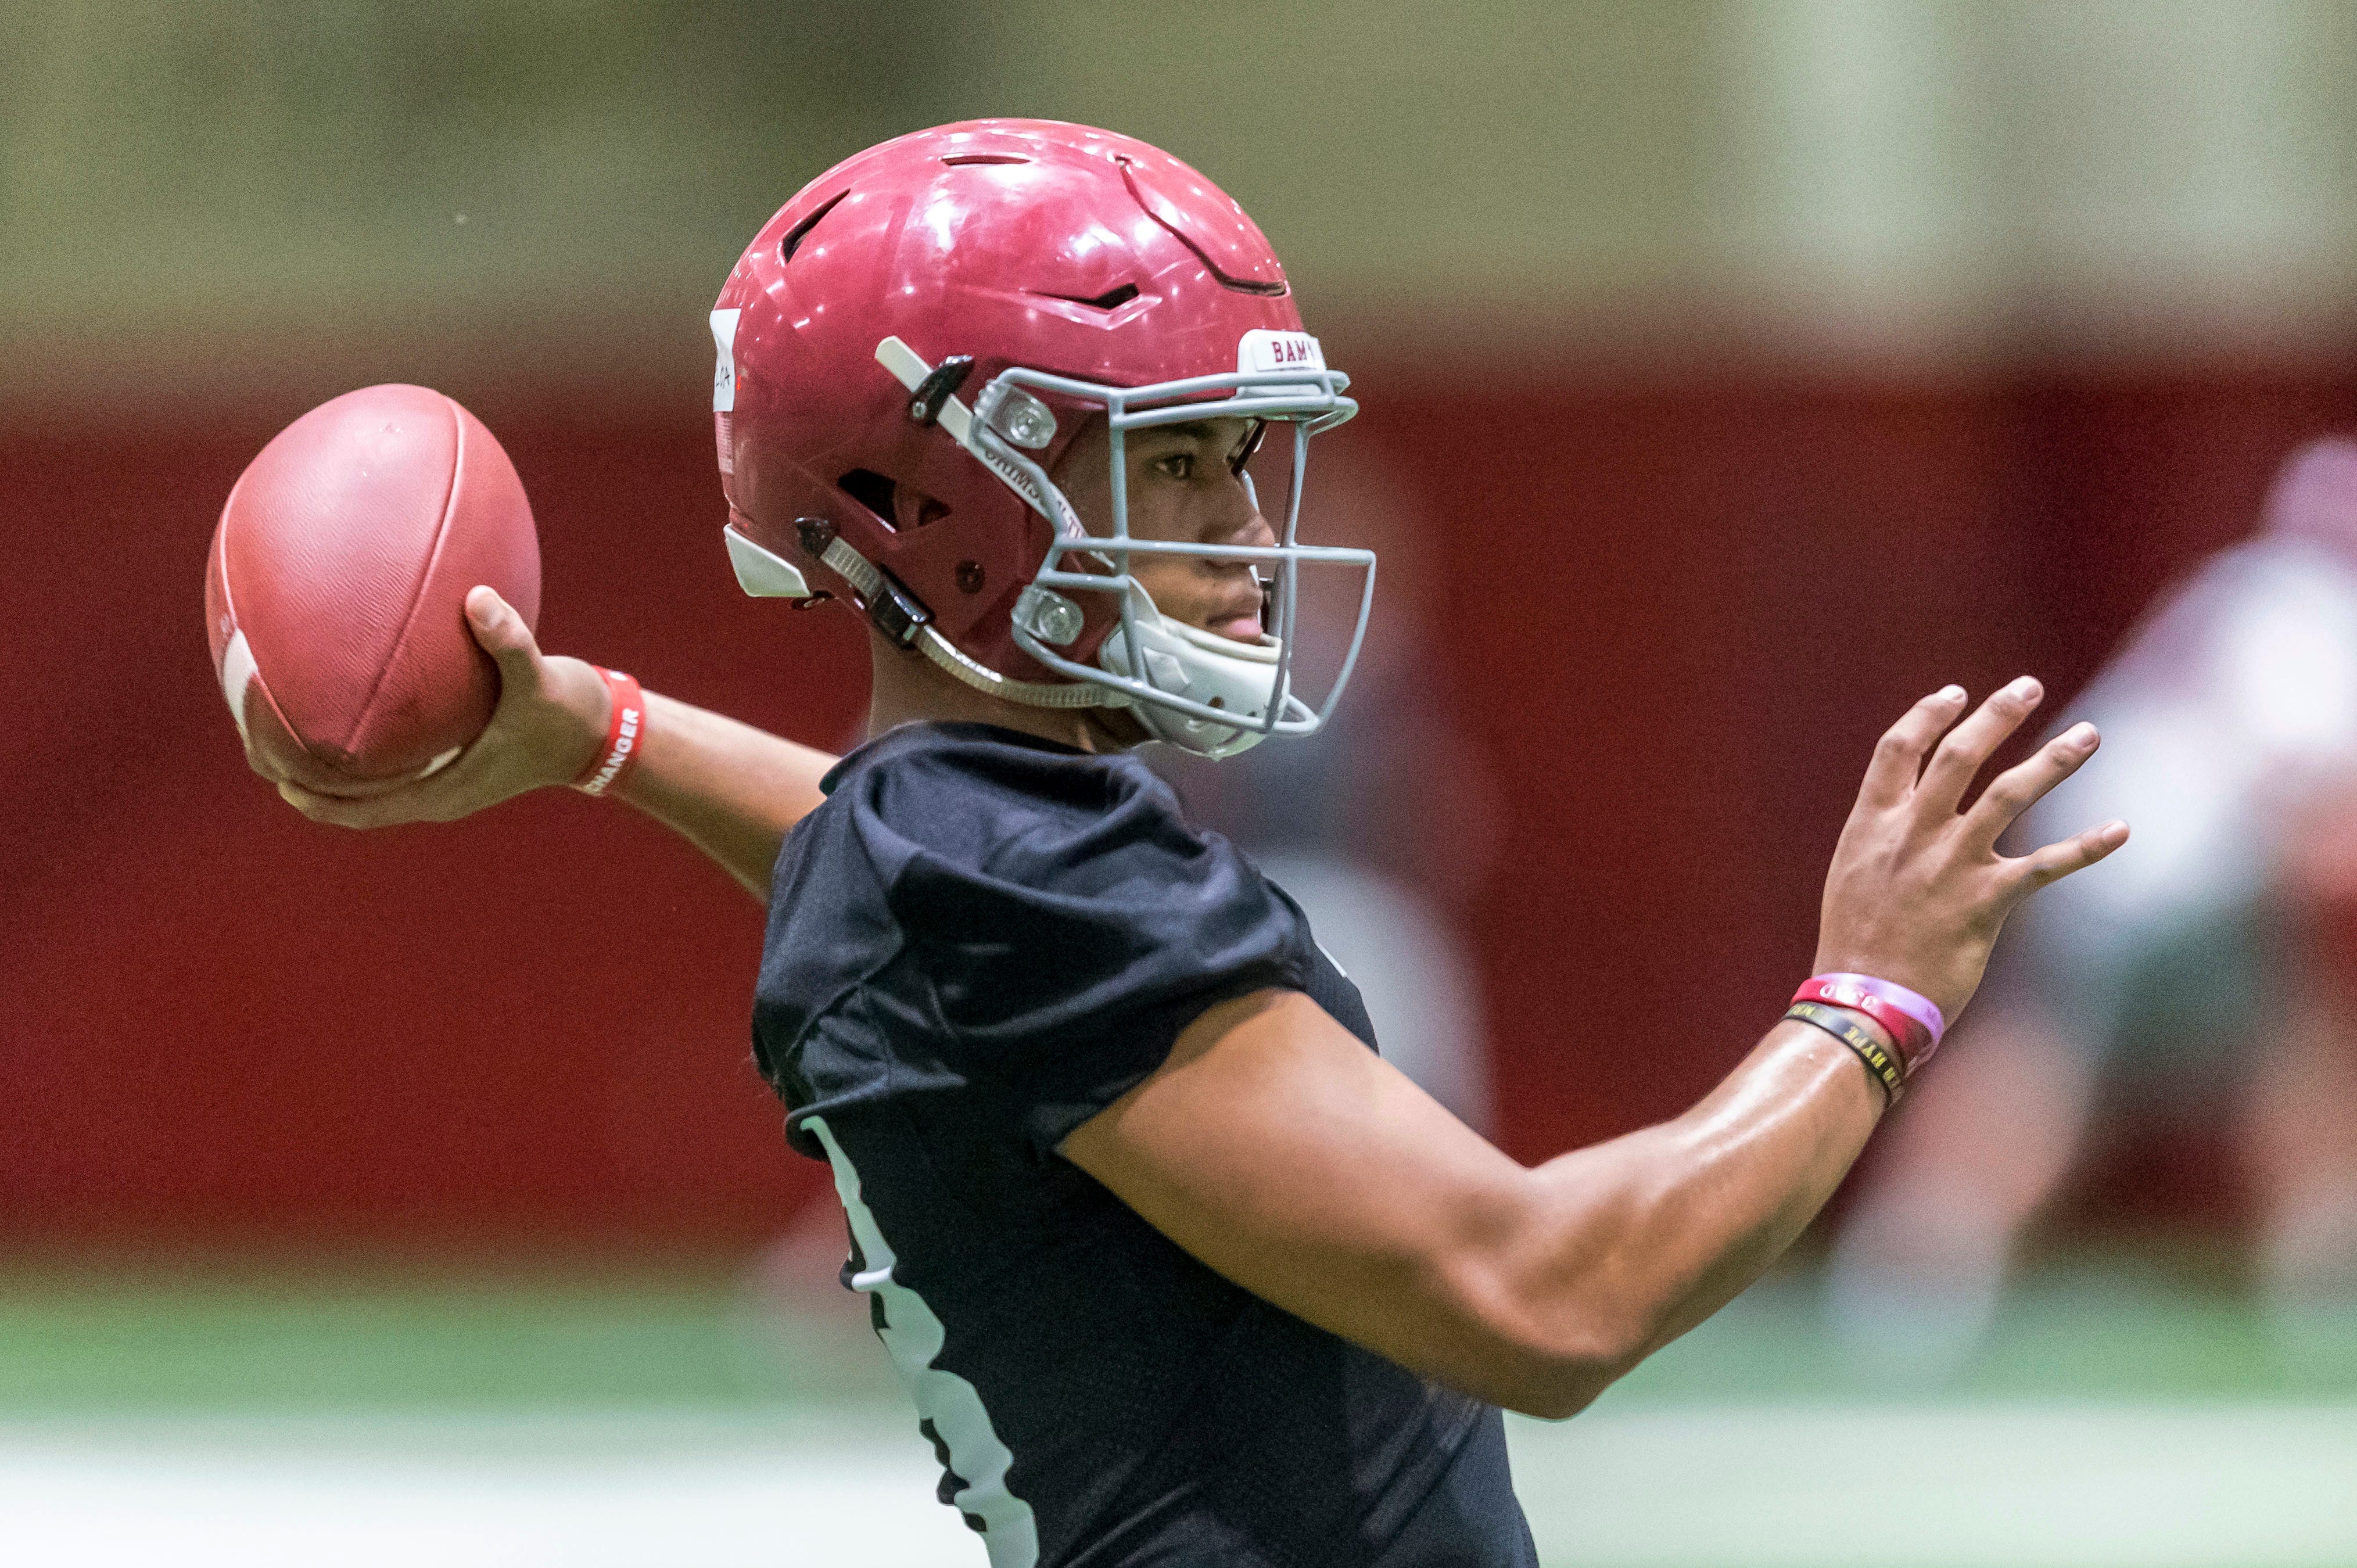 Alabama's title game star Tagovailoa out until August with re-injured left hand